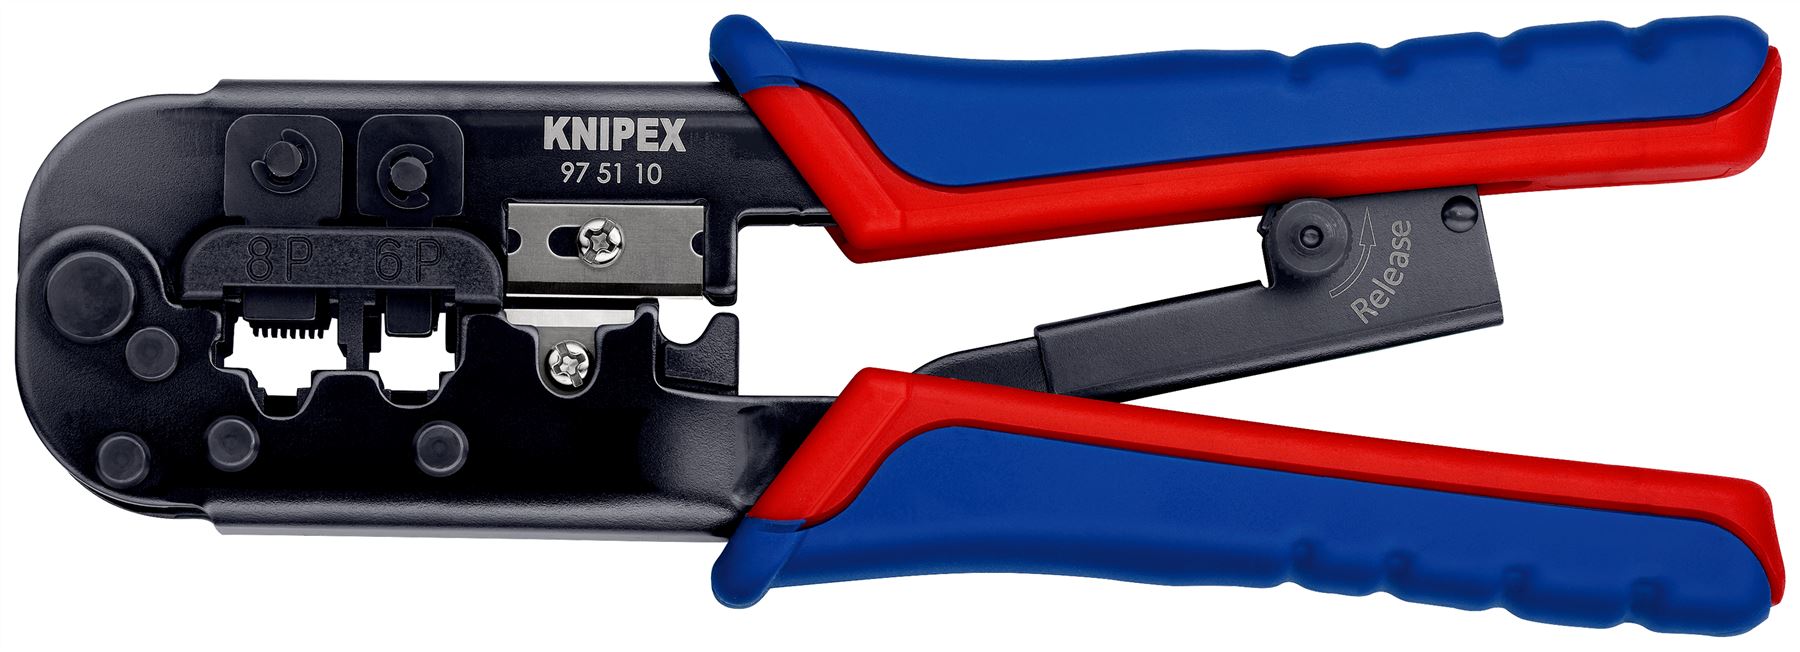 KNIPEX Crimping Pliers for Western Plugs RJ45 RJ11 RJ12 190mm Multi Component Grips 97 51 10